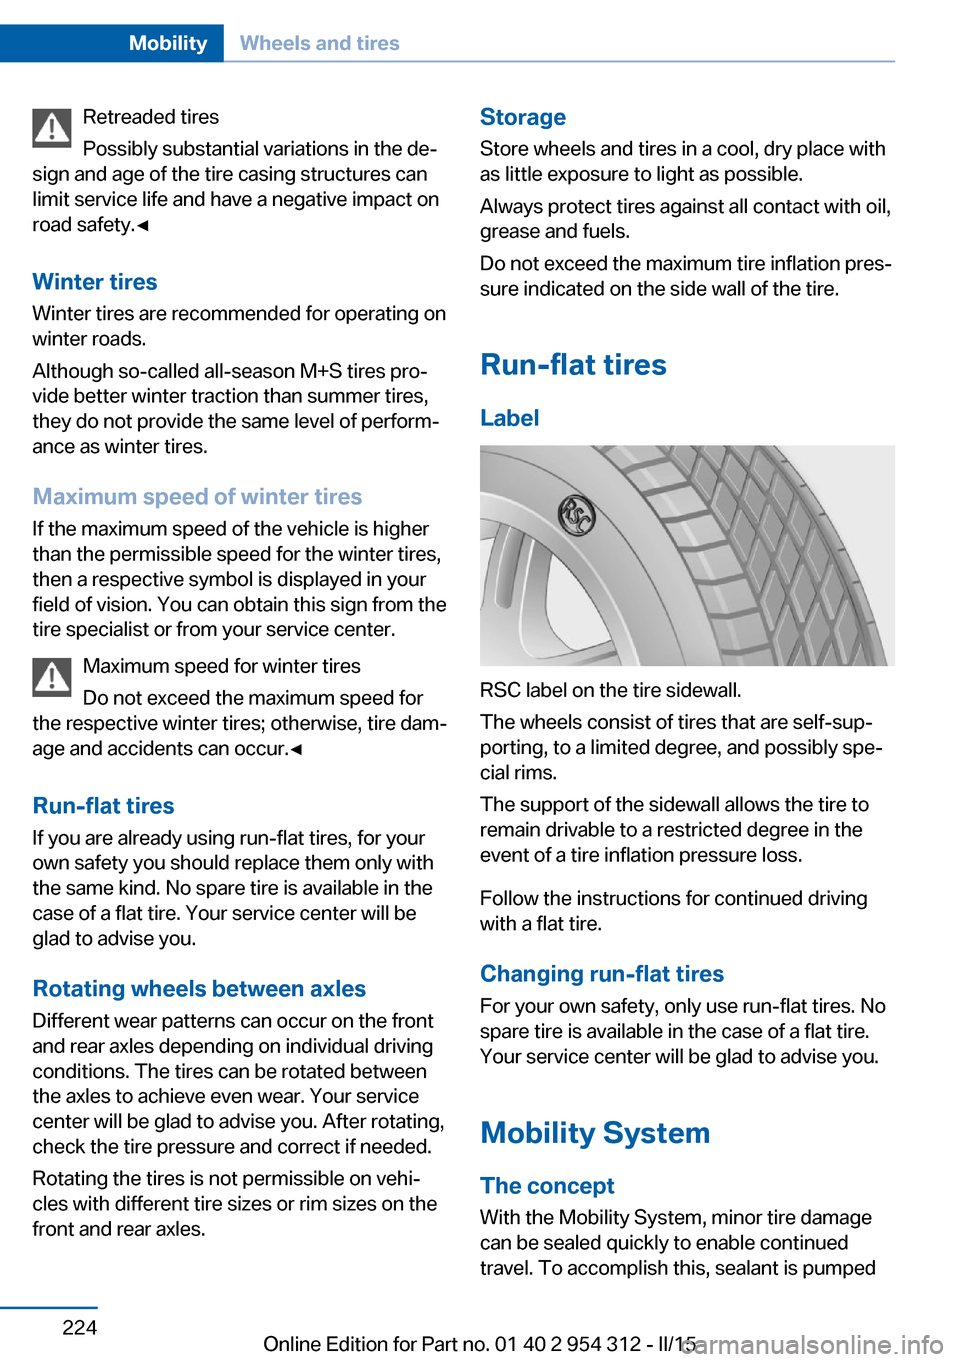 BMW 5 SERIES 2015 F10 Owners Guide Retreaded tires
Possibly substantial variations in the de‐
sign and age of the tire casing structures can
limit service life and have a negative impact on
road safety.◀
Winter tires
Winter tires a